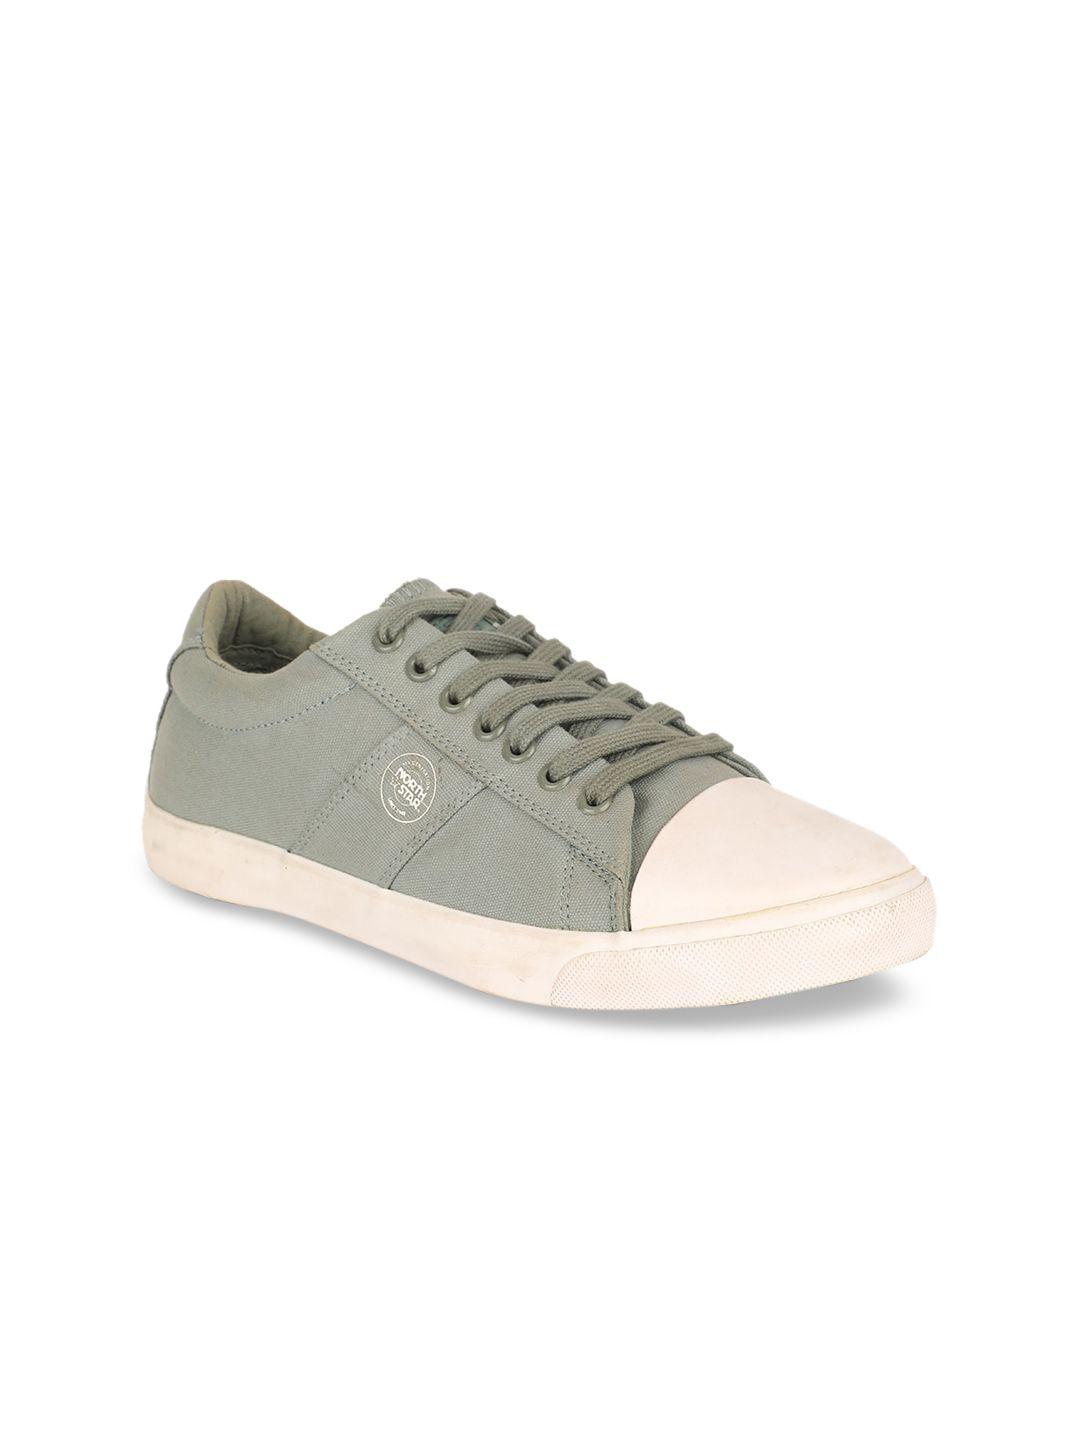 north star women green solid sneakers